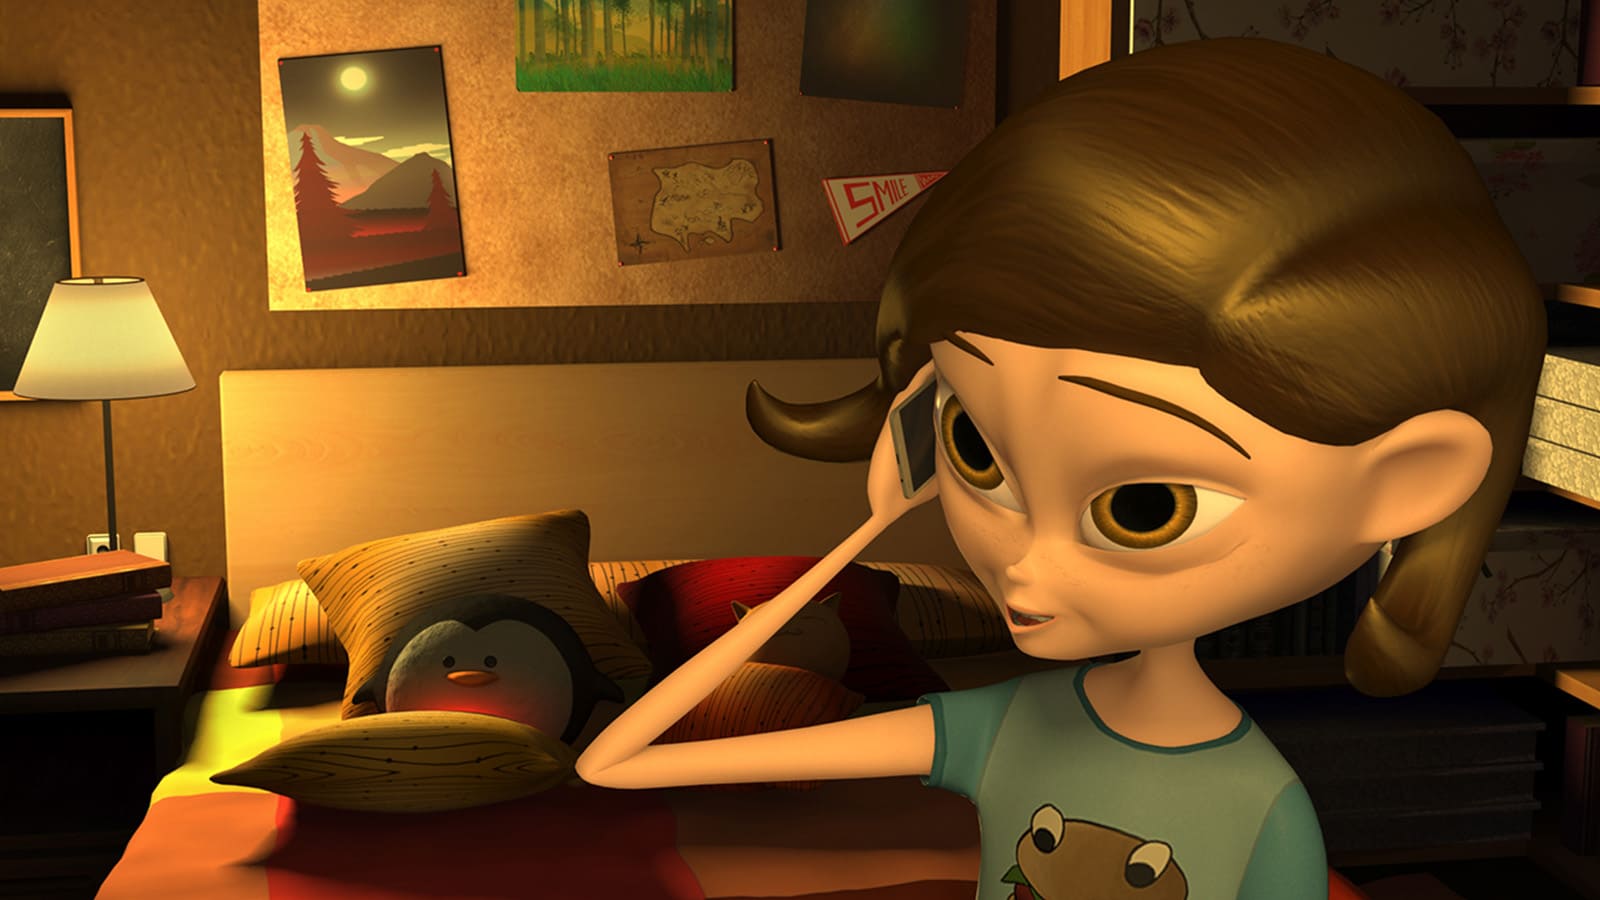 Skye, the main character tries to hear her friend's voice through the phone without her auditory implant device.